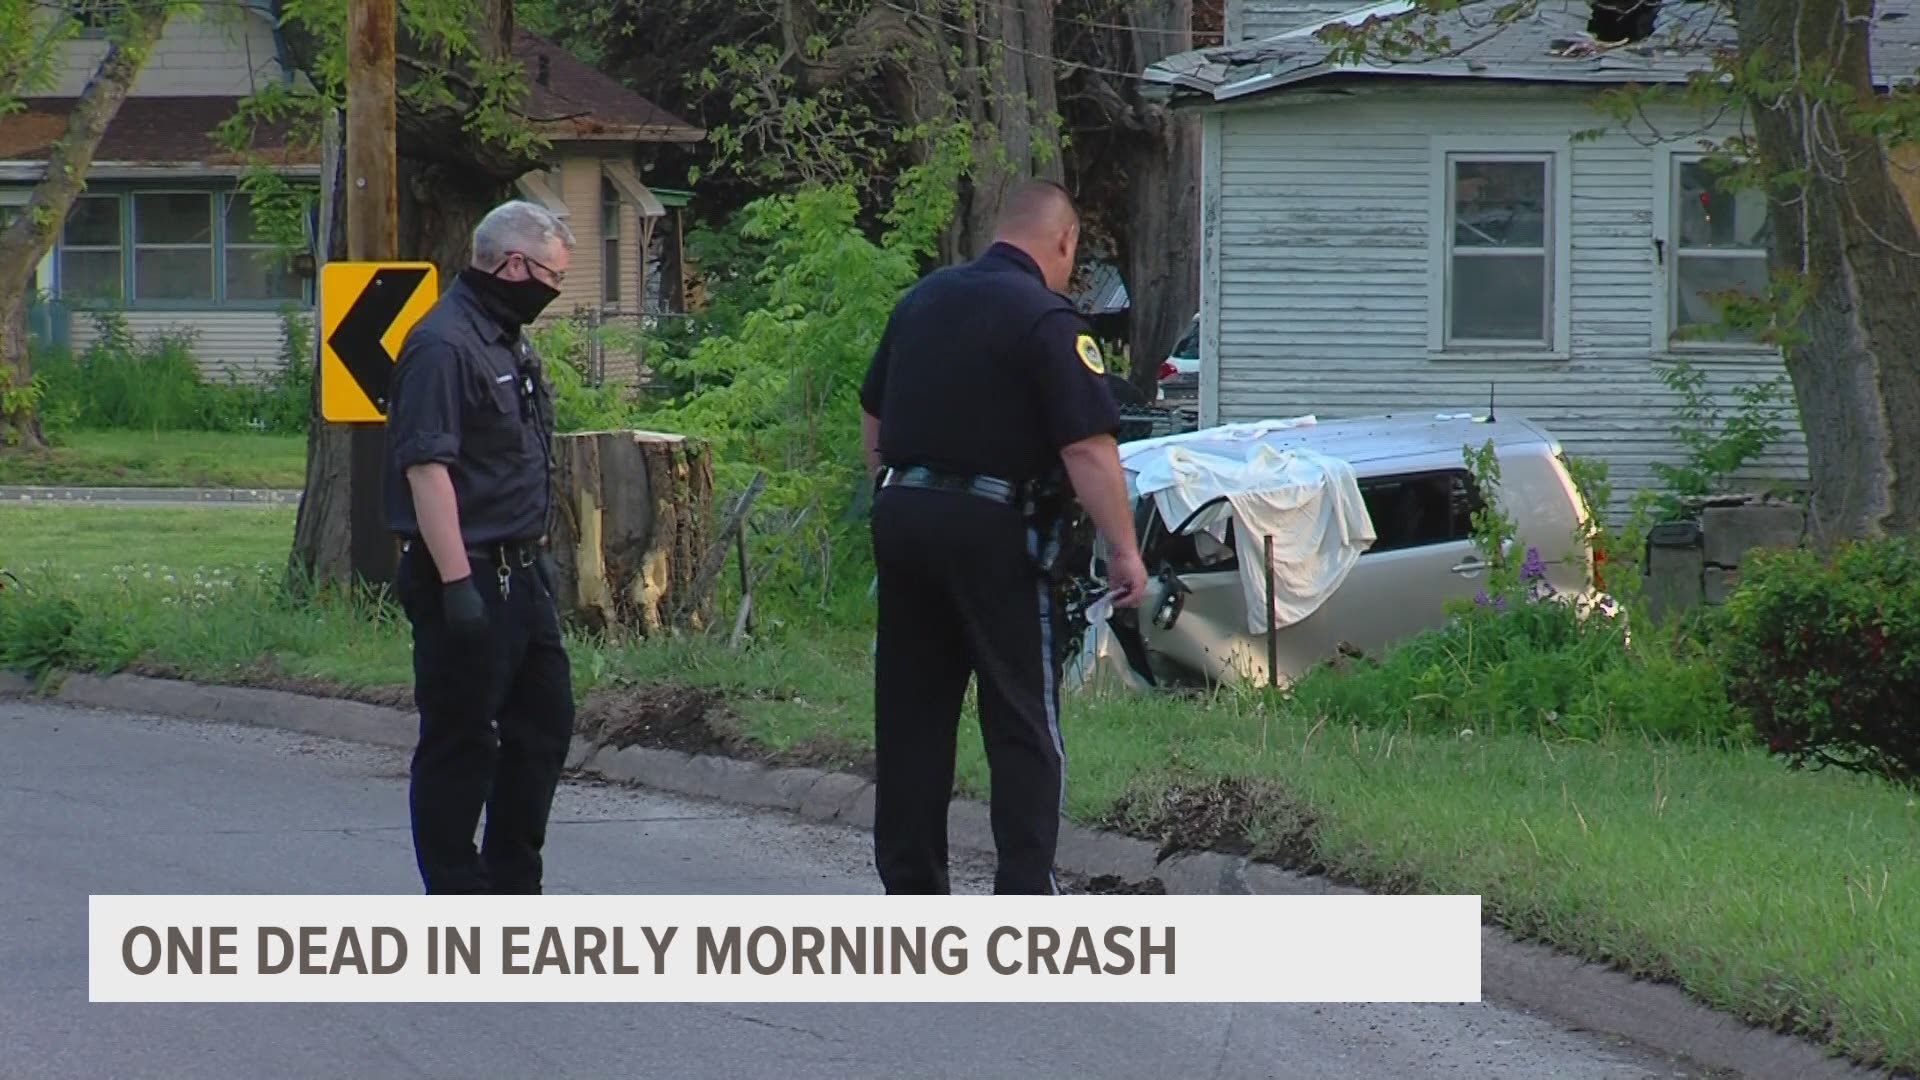 One person is dead after an early morning, one-vehicle crash near Des Moines' Drake neighborhood.